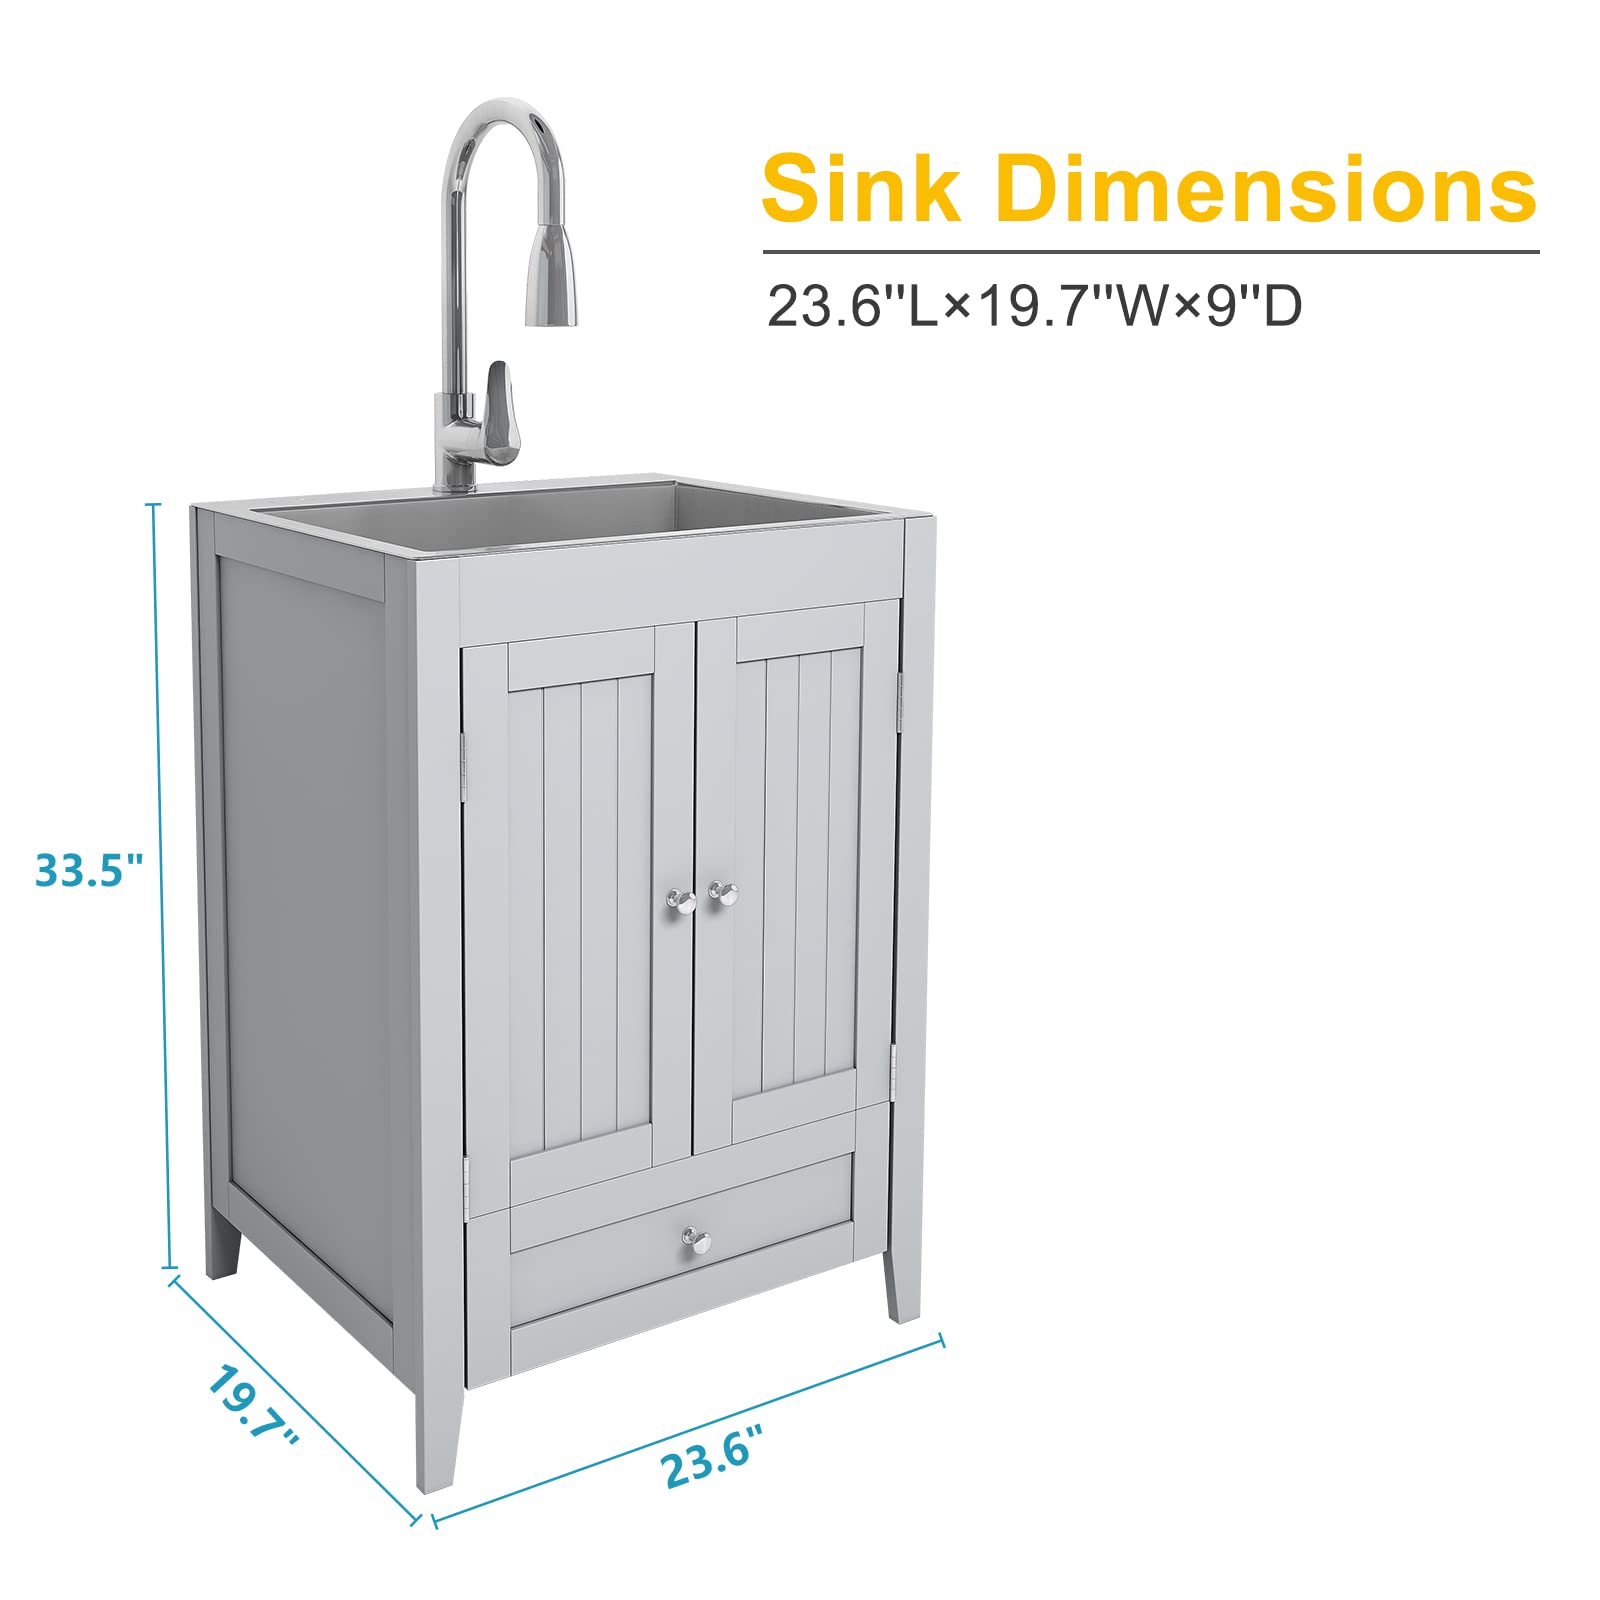 VINGLI 24-Inch Laundry Sink with Cabinet and Pull-Out Sprayer Faucet, Stainless Steel Utility Sink with Cabinet and Drawer Combo, Cabinet with Sink for Laundry & Utility Room, Kitchen, Bathroom, Grey